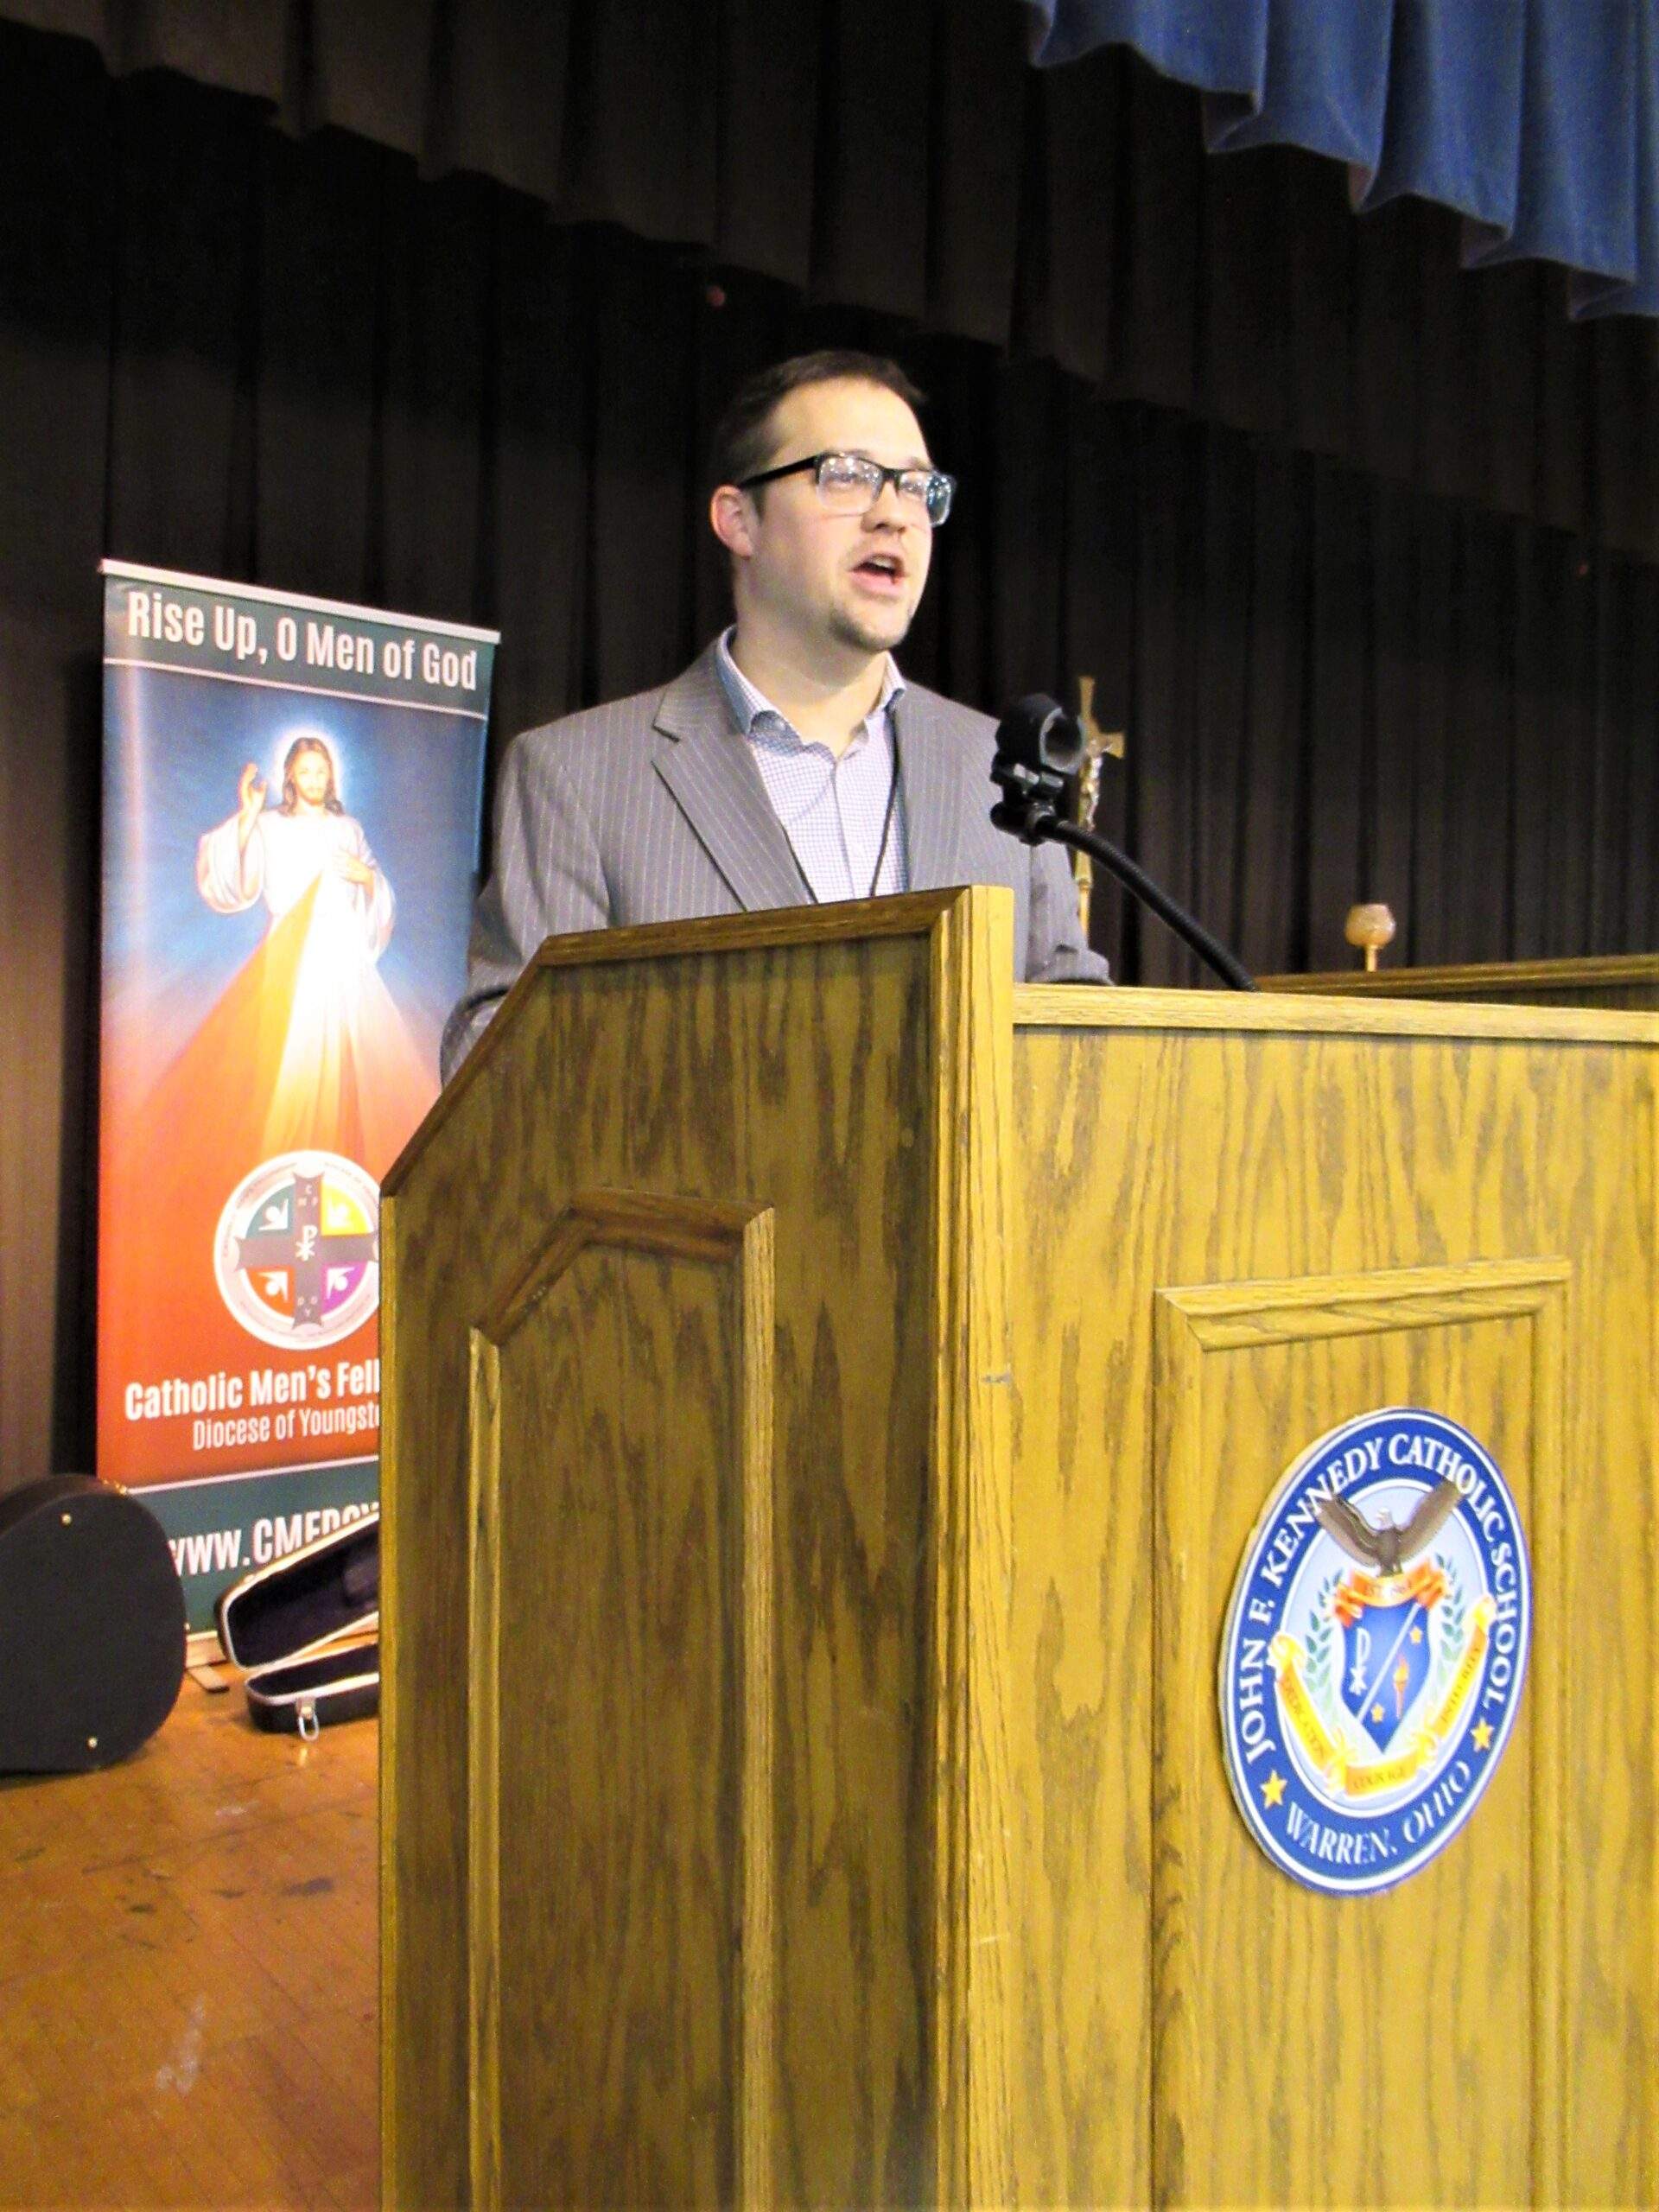 Dr. Ben Safranski speaks at the podium during the Youngstown Catholic Men's Fellowship Conference.